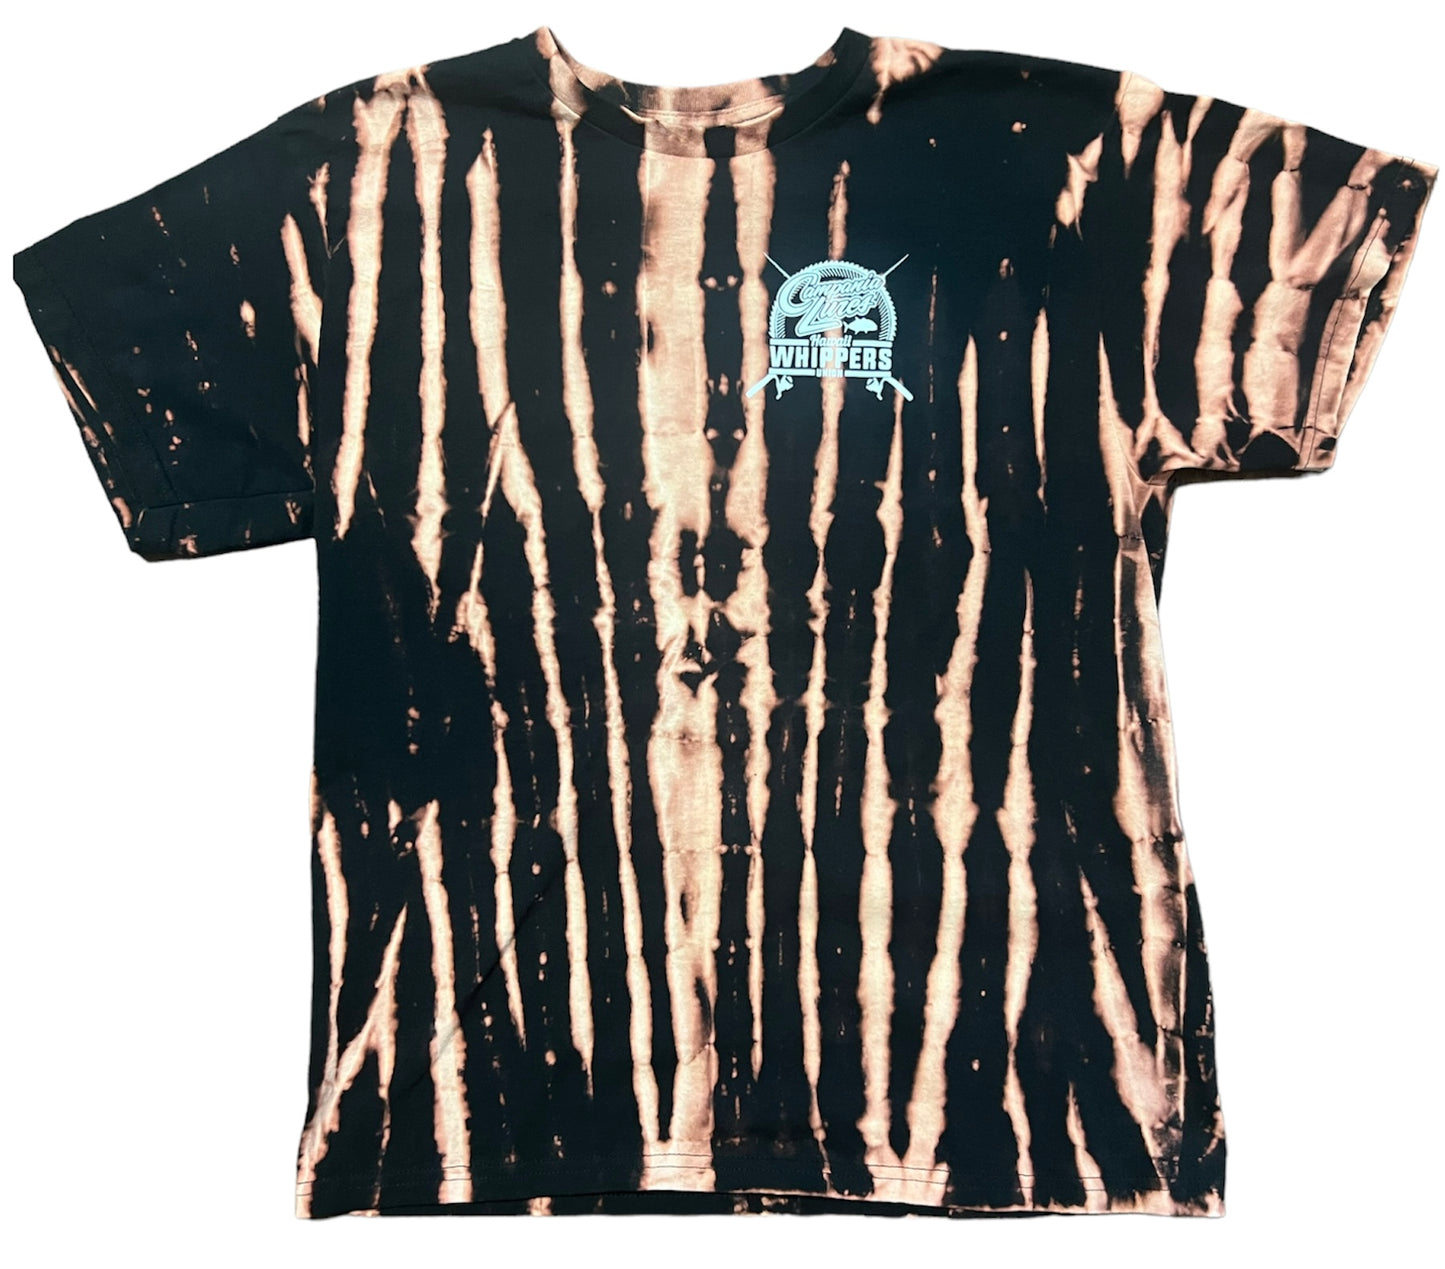 Bleached Tie Dye Campania X Hawaii Whippers Union Black Tee's. (Large Only) Sample run